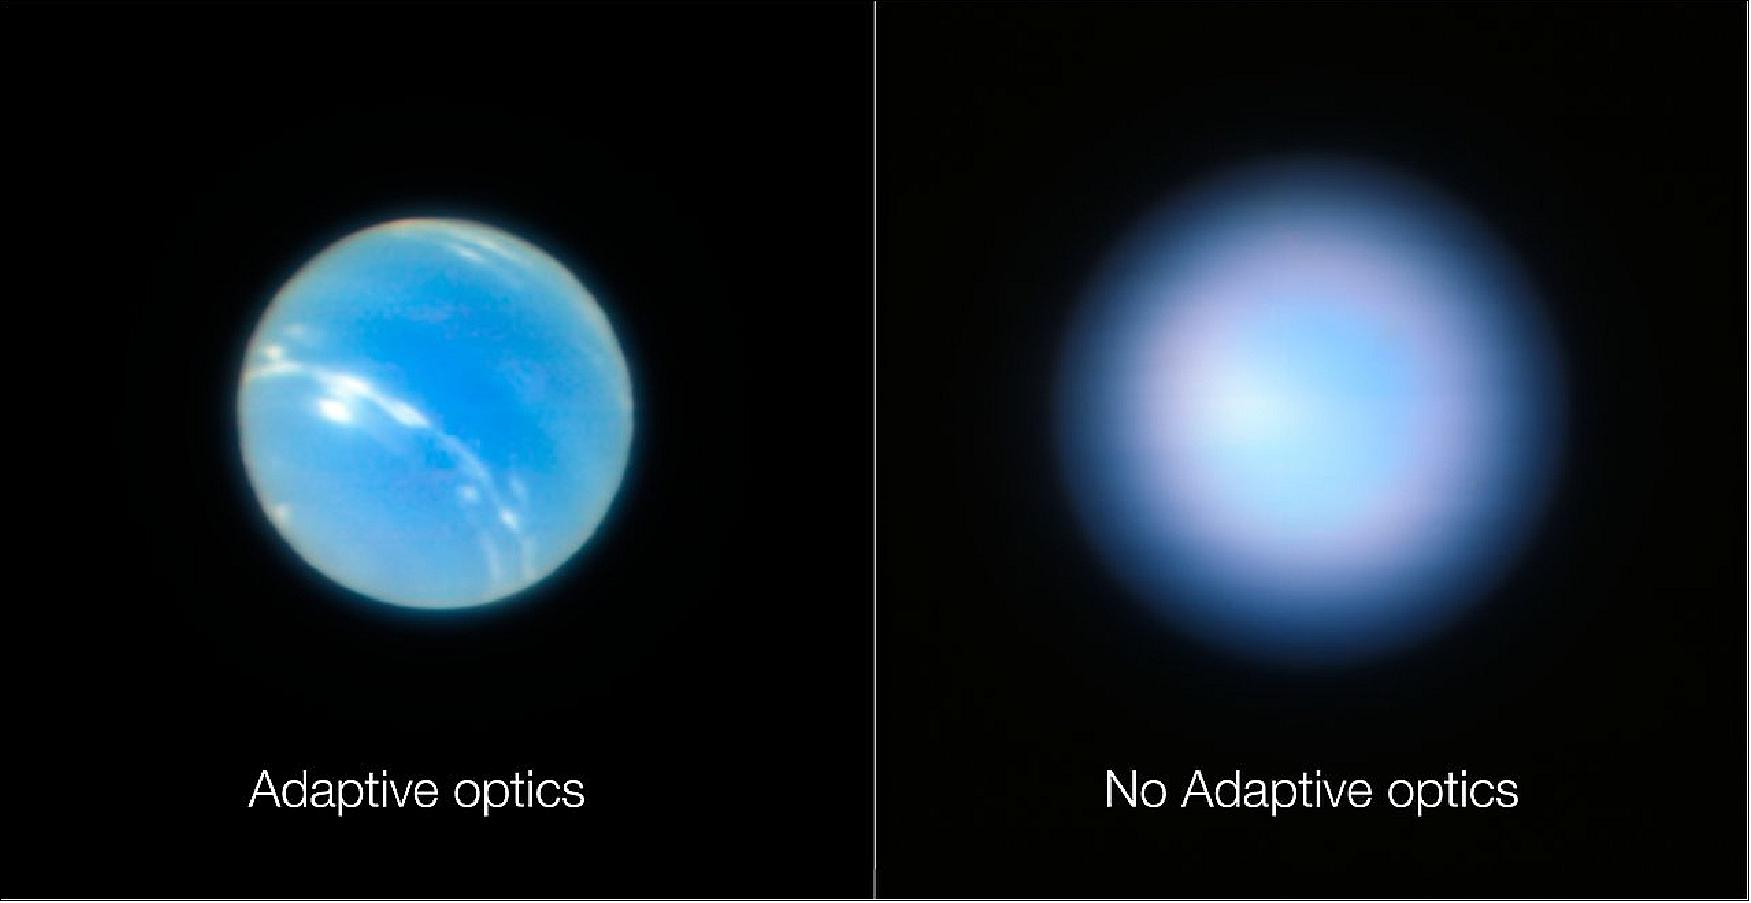 Figure 69: Neptune from the VLT with and without adaptive optics (image credit: ESO)